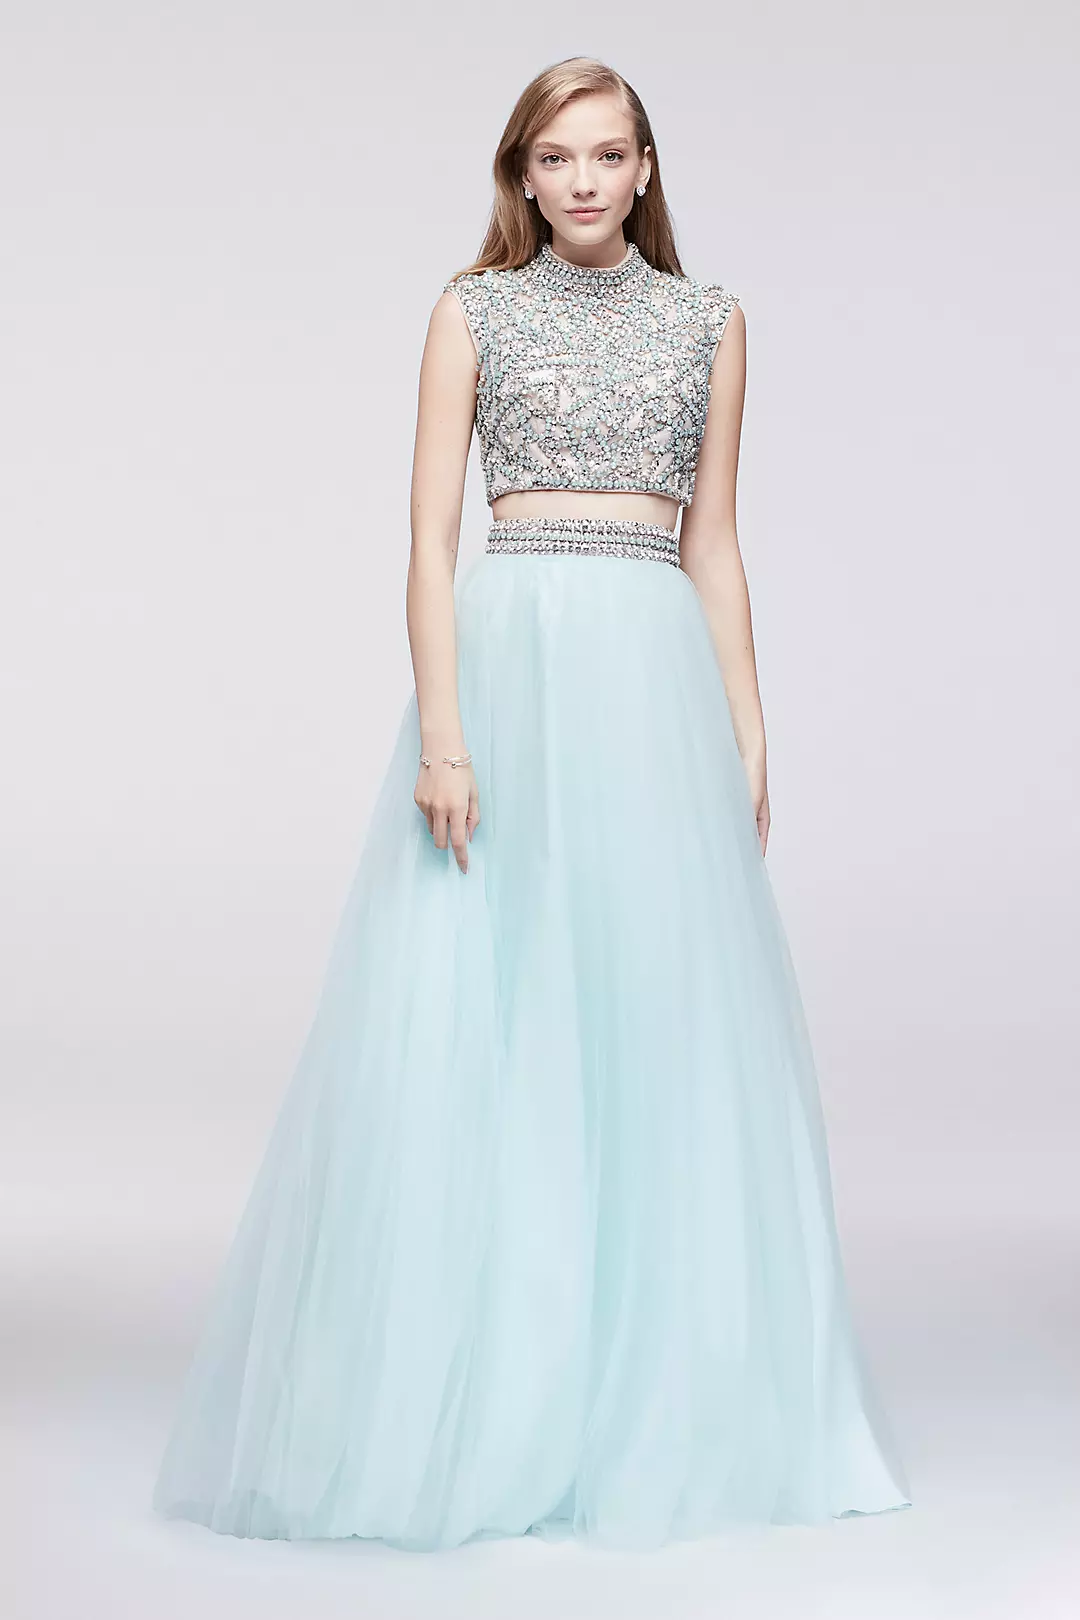 Jeweled High-Neck Top and Tulle Skirt Set Image